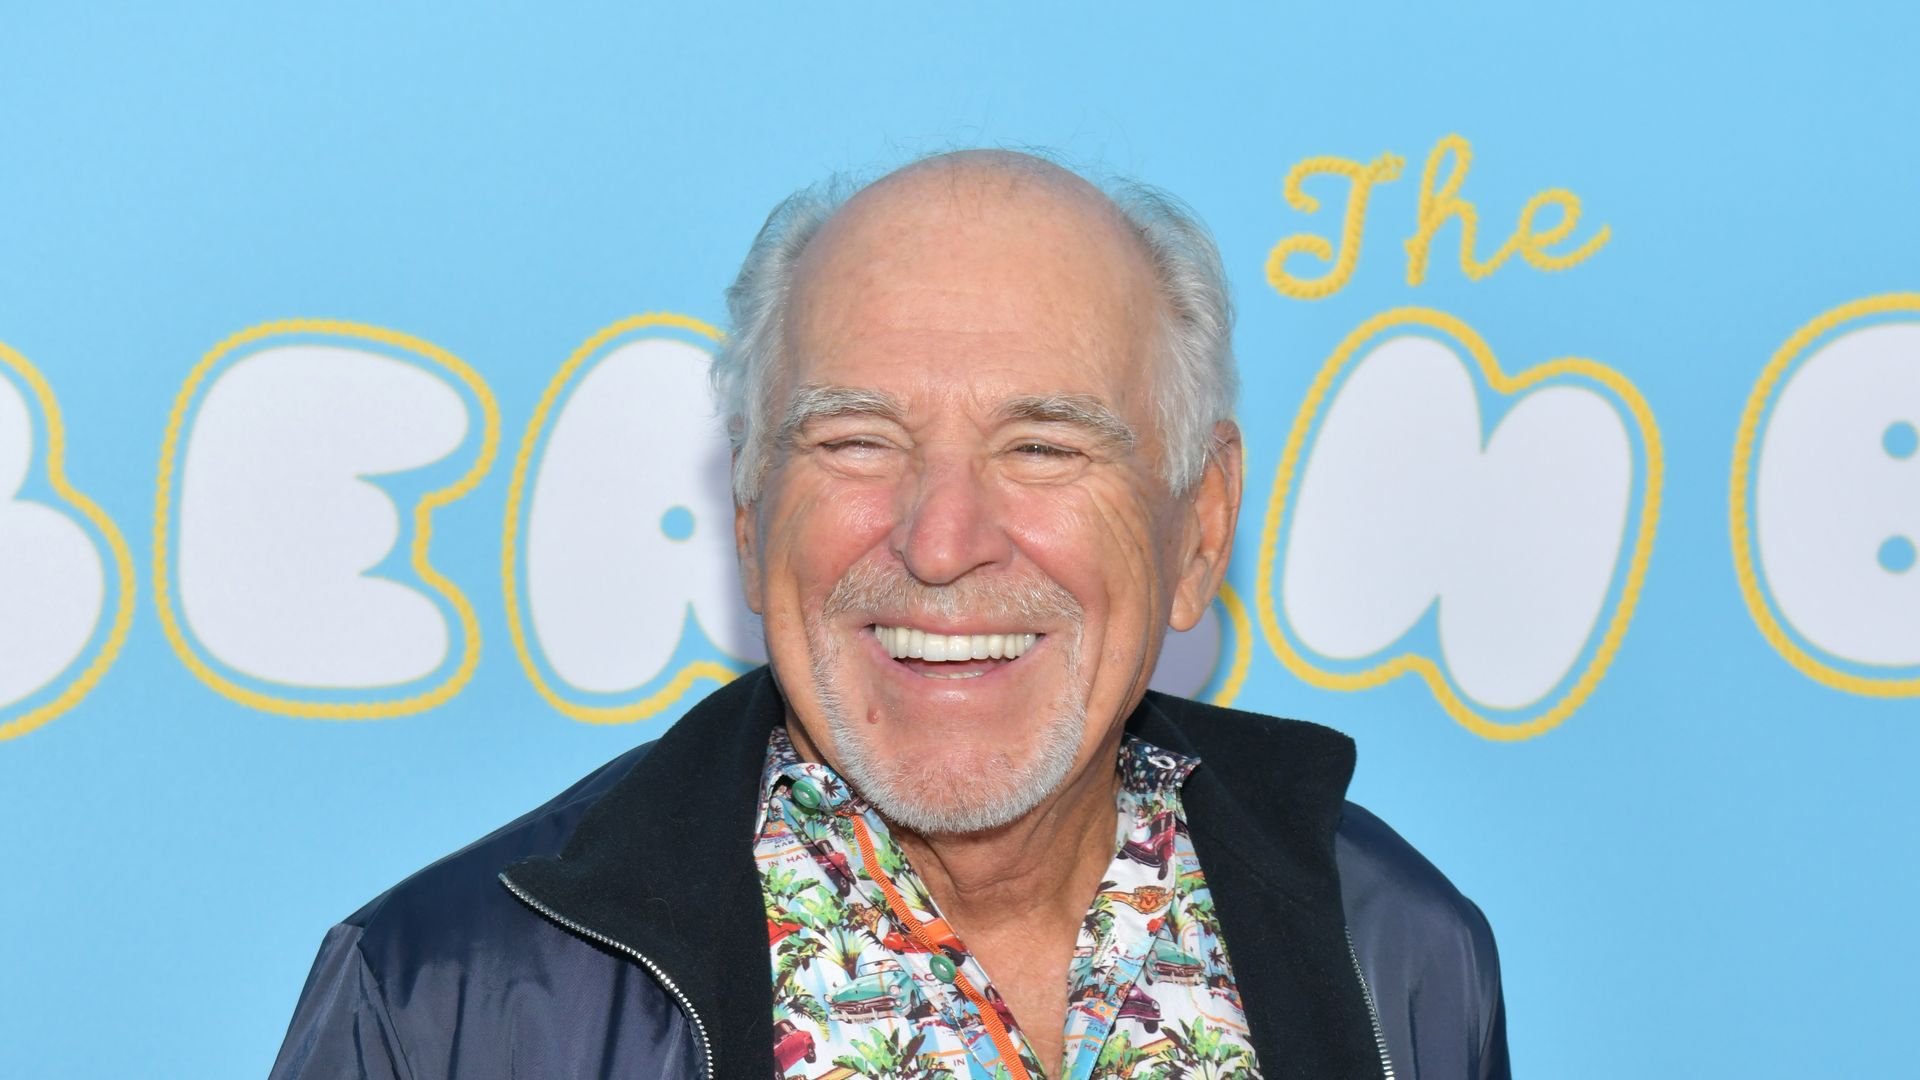 Jimmy Buffett attends the premiere of Neon and Vice Studio's "The Beach Bum" at ArcLight Hollywood on March 28, 2019 in Hollywood, California